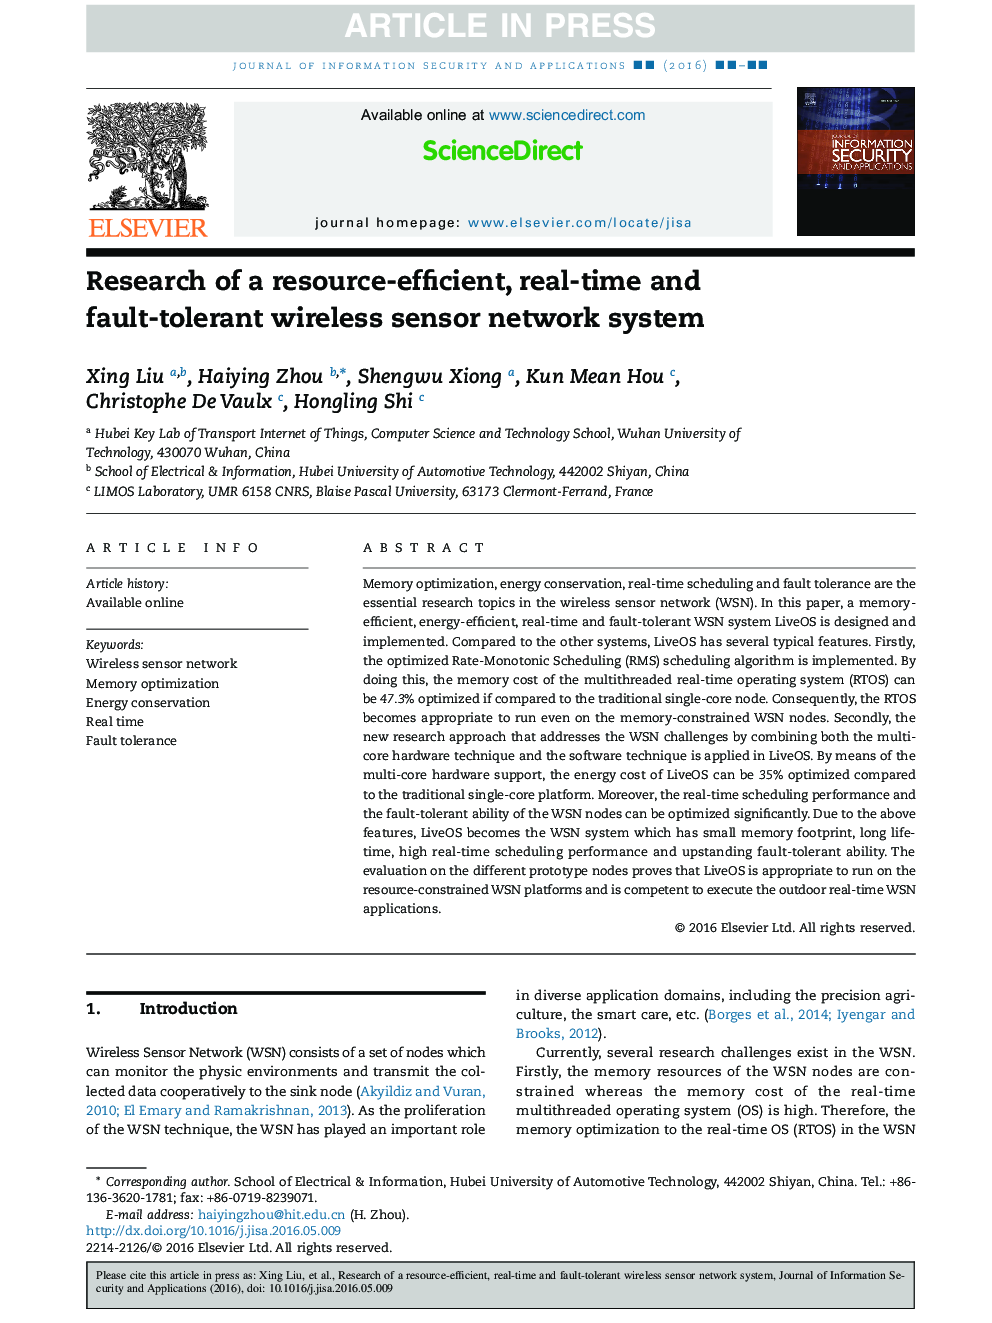 Research of a resource-efficient, real-time and fault-tolerant wireless sensor network system